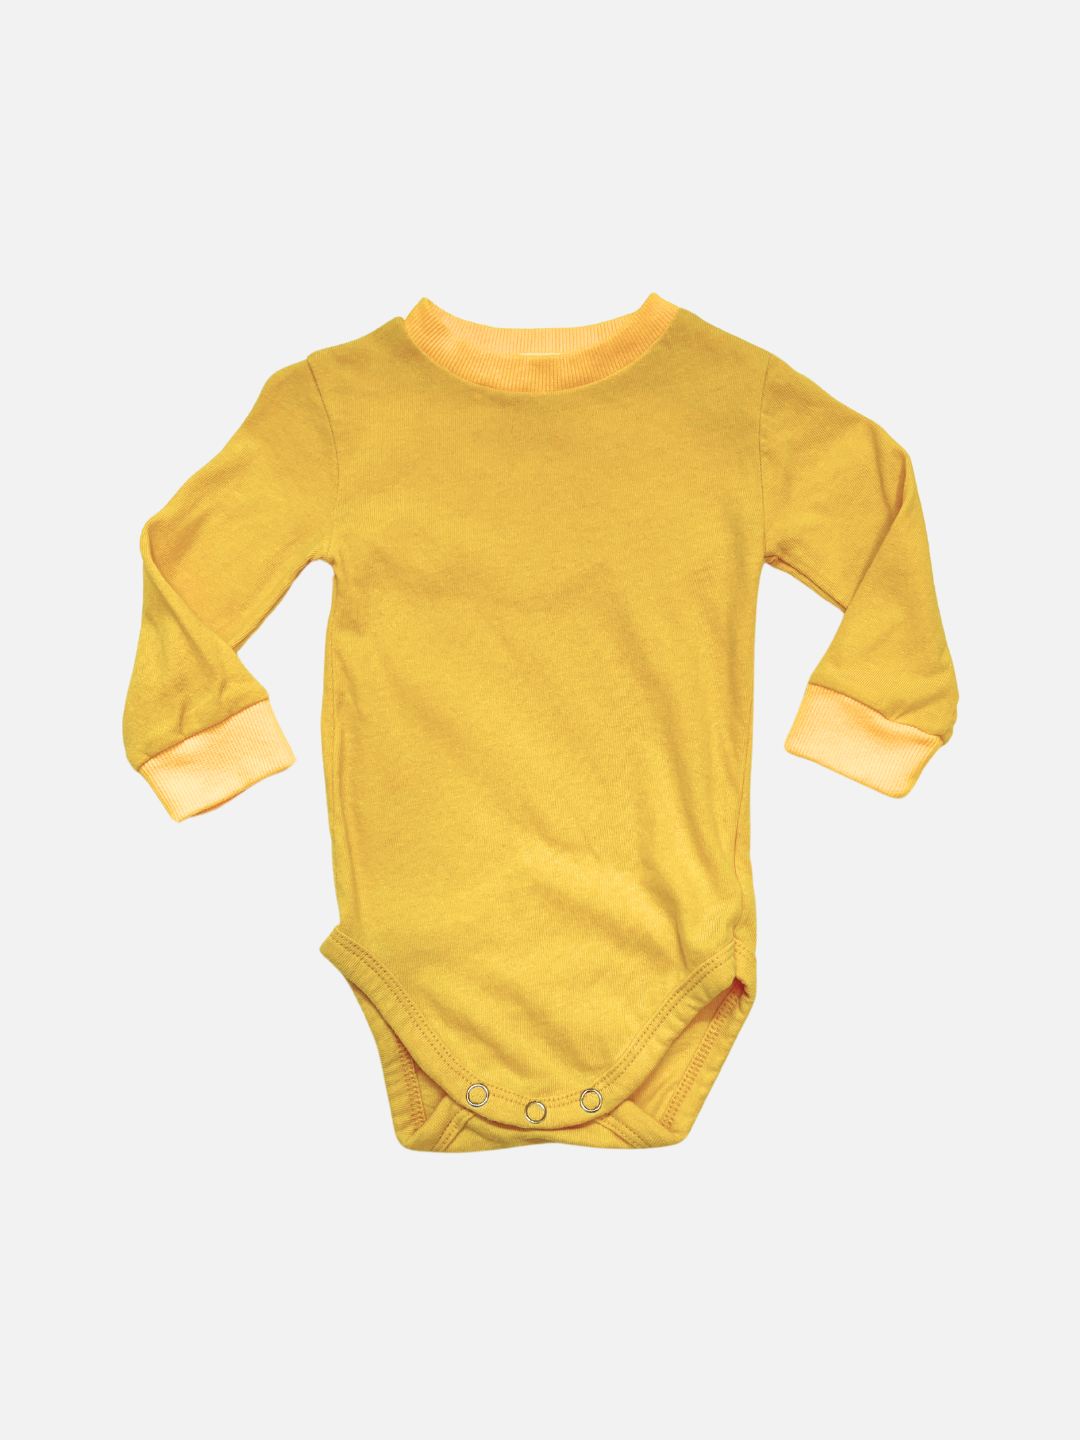 A front view of the baby patch onesie in yellow